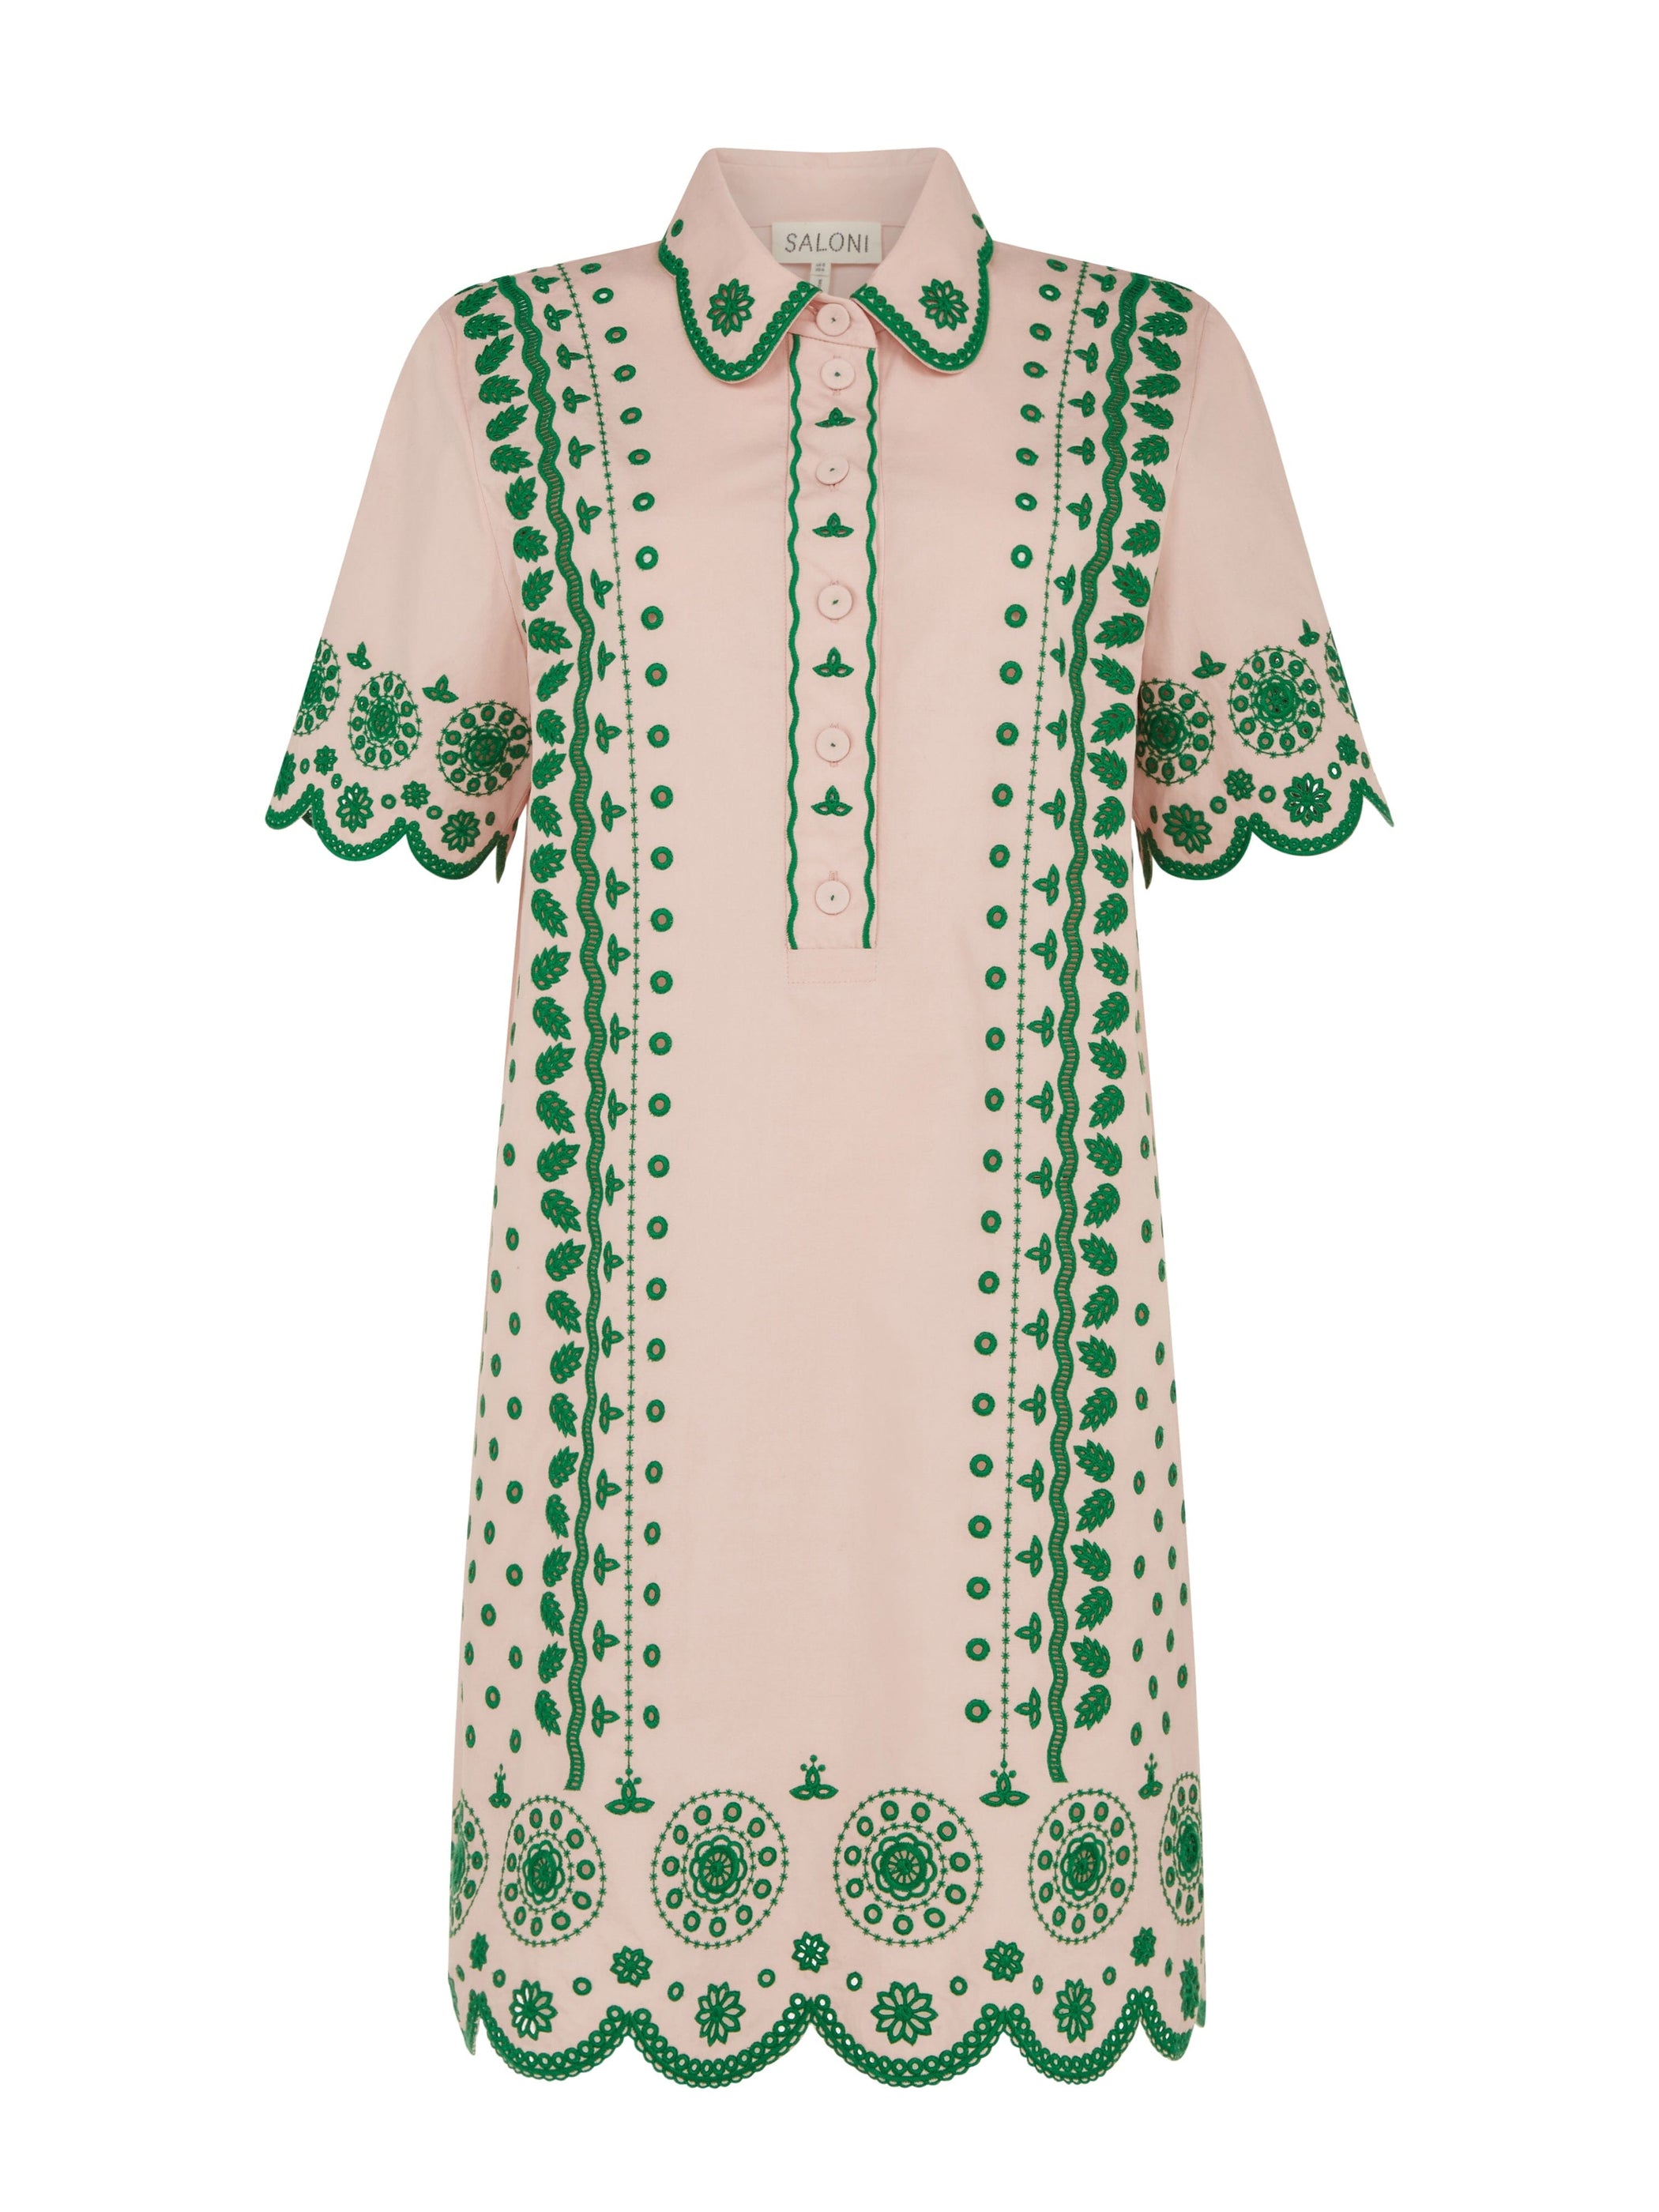 Dree Cotton Broderie-anglaise Shirt Dress in Blush Pink Apple